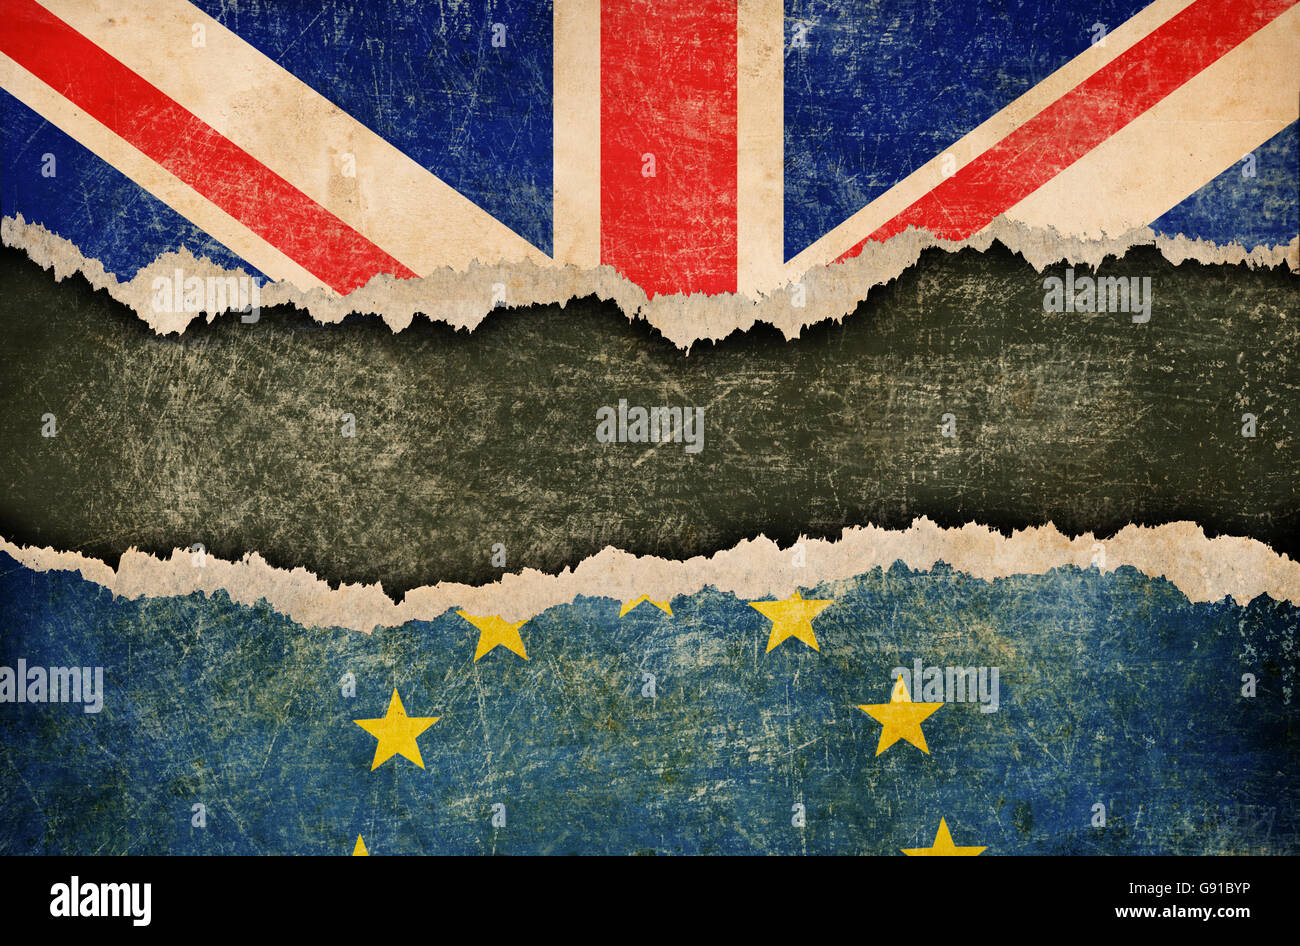 Great Britain withdrawal from European union brexit concept Stock Photo